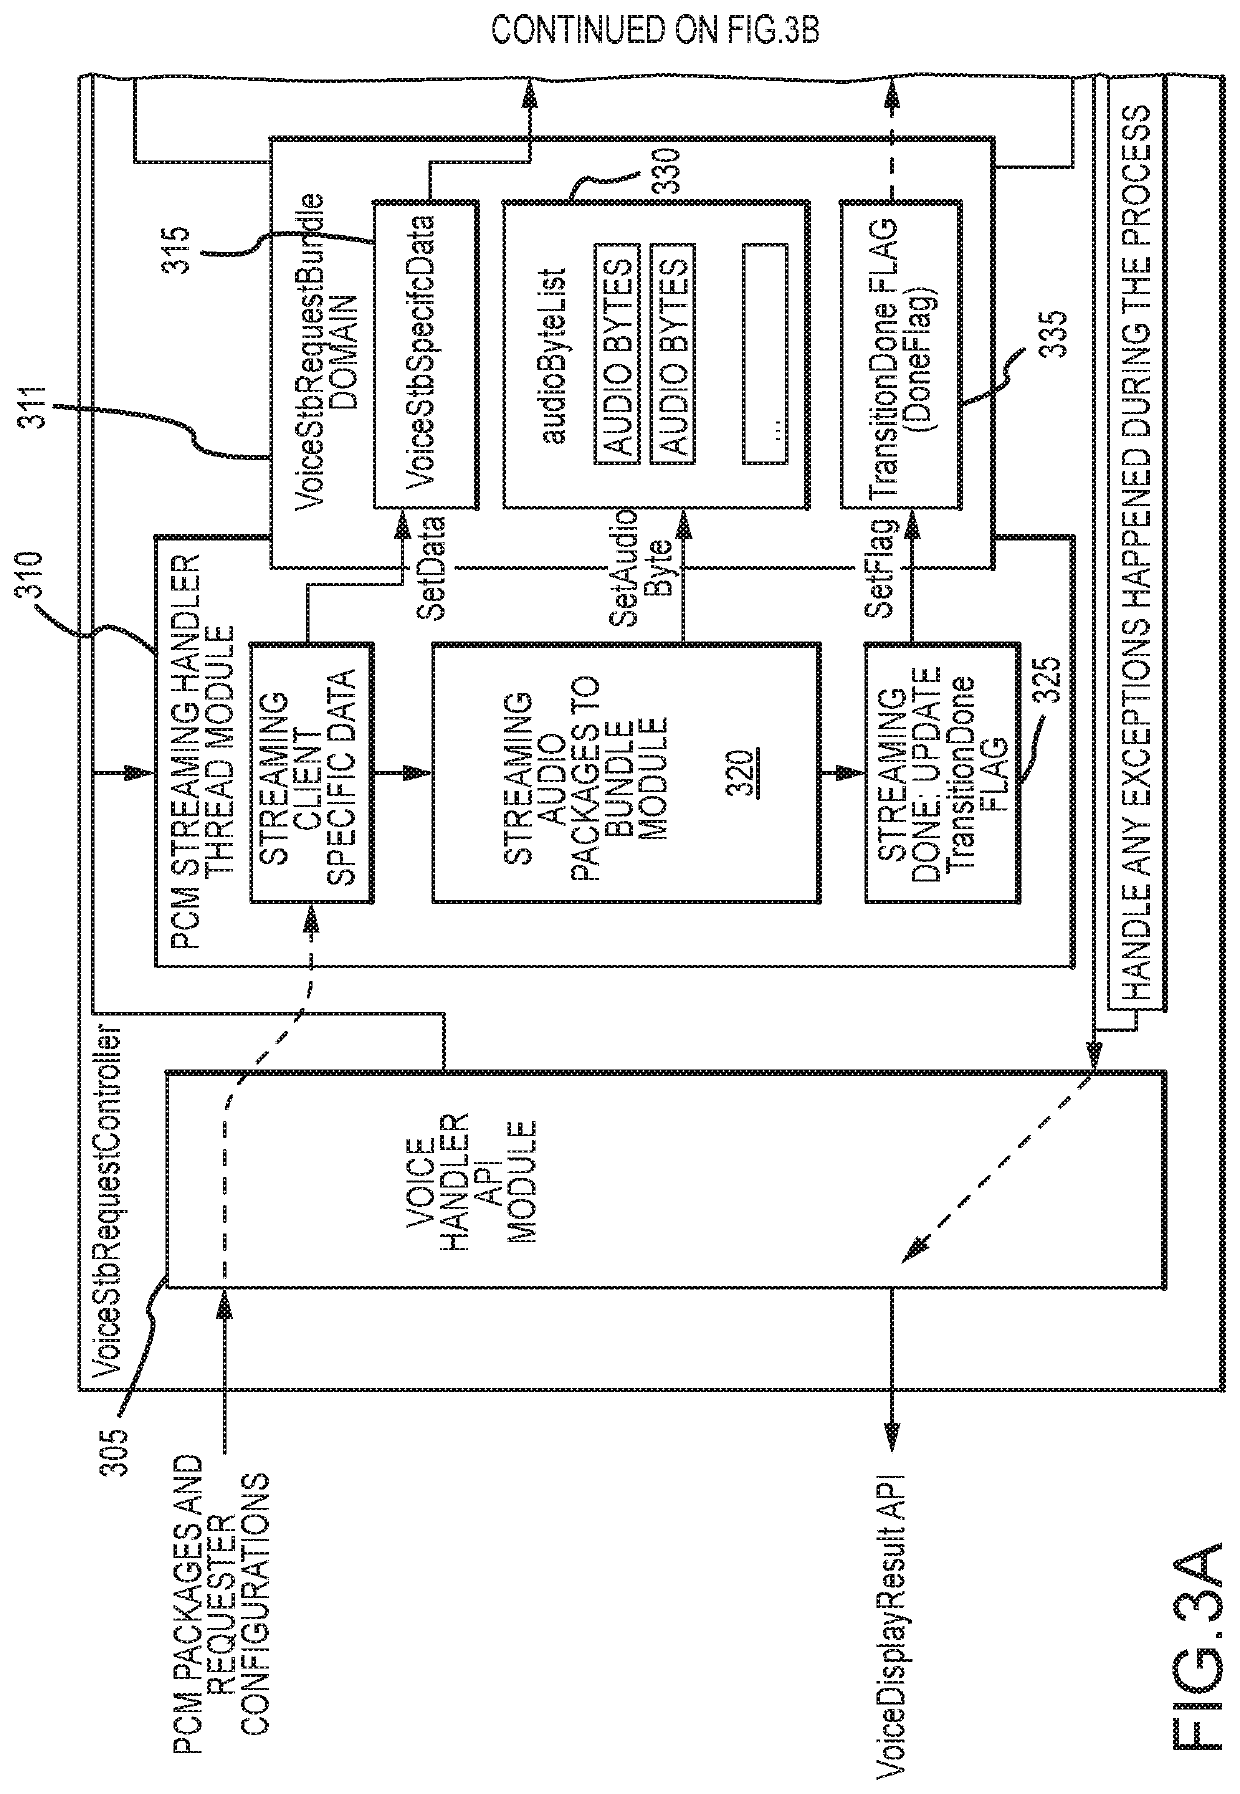 Methods and systems for implementing an elastic cloud based voice search using a third-party search provider